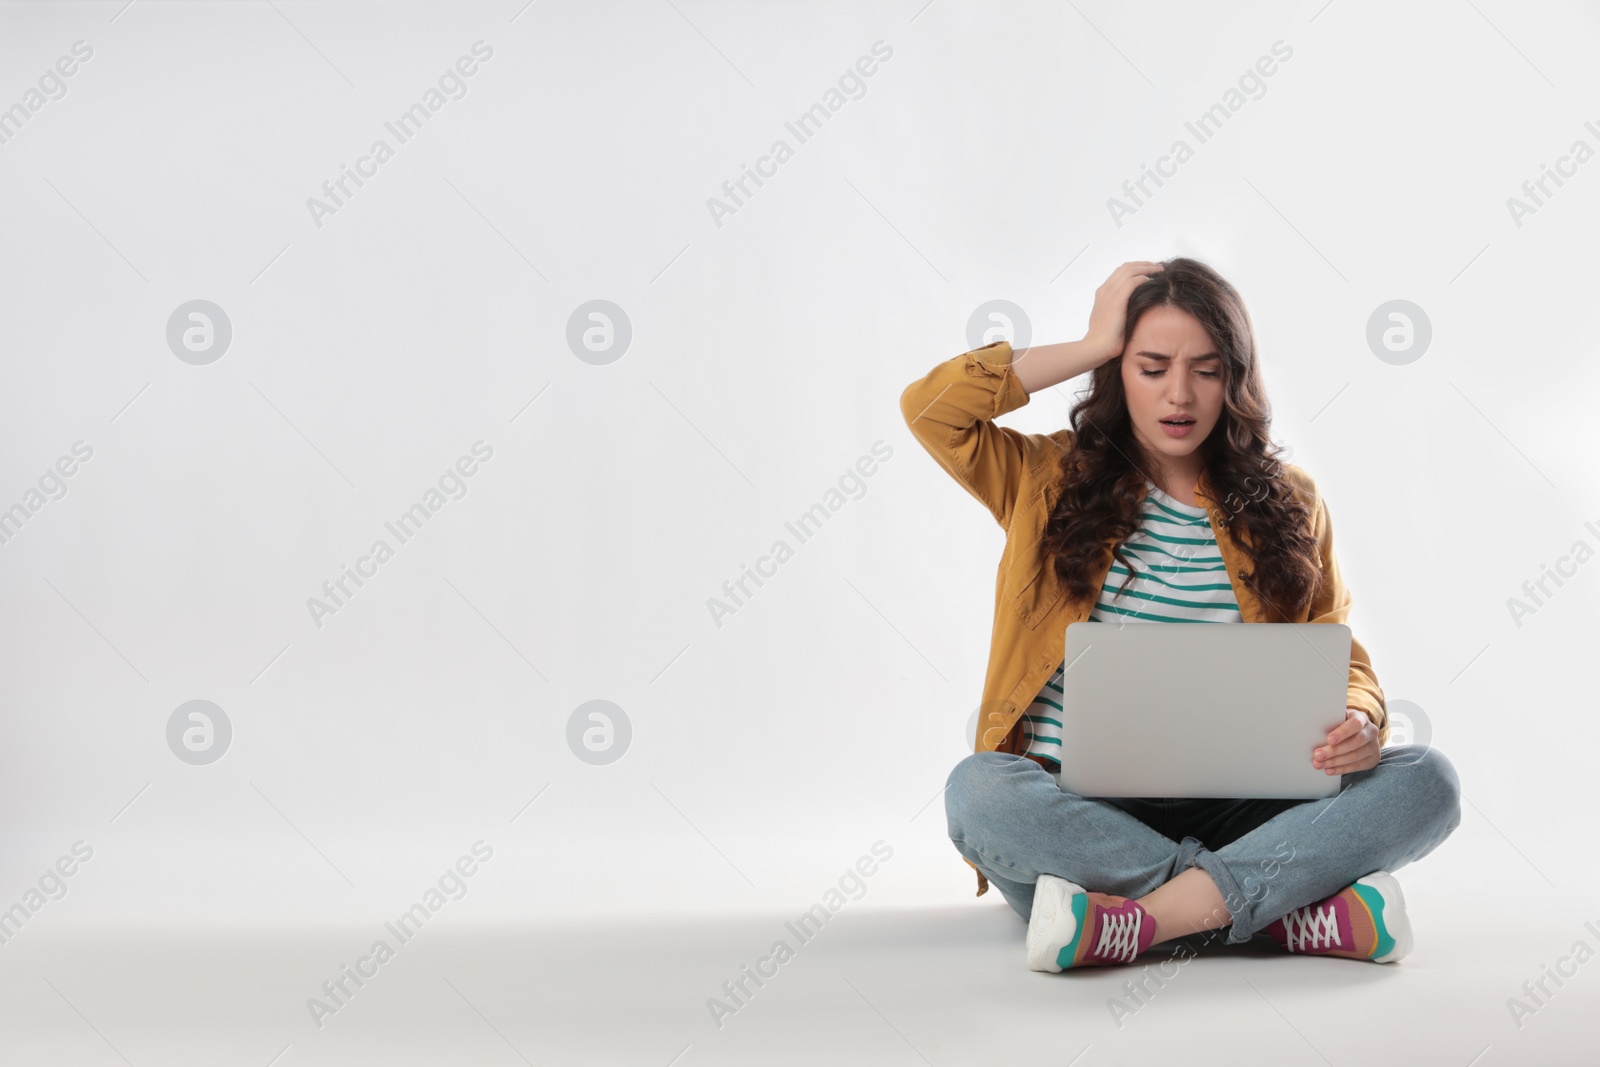 Photo of Shocked young woman sitting with laptop on white background